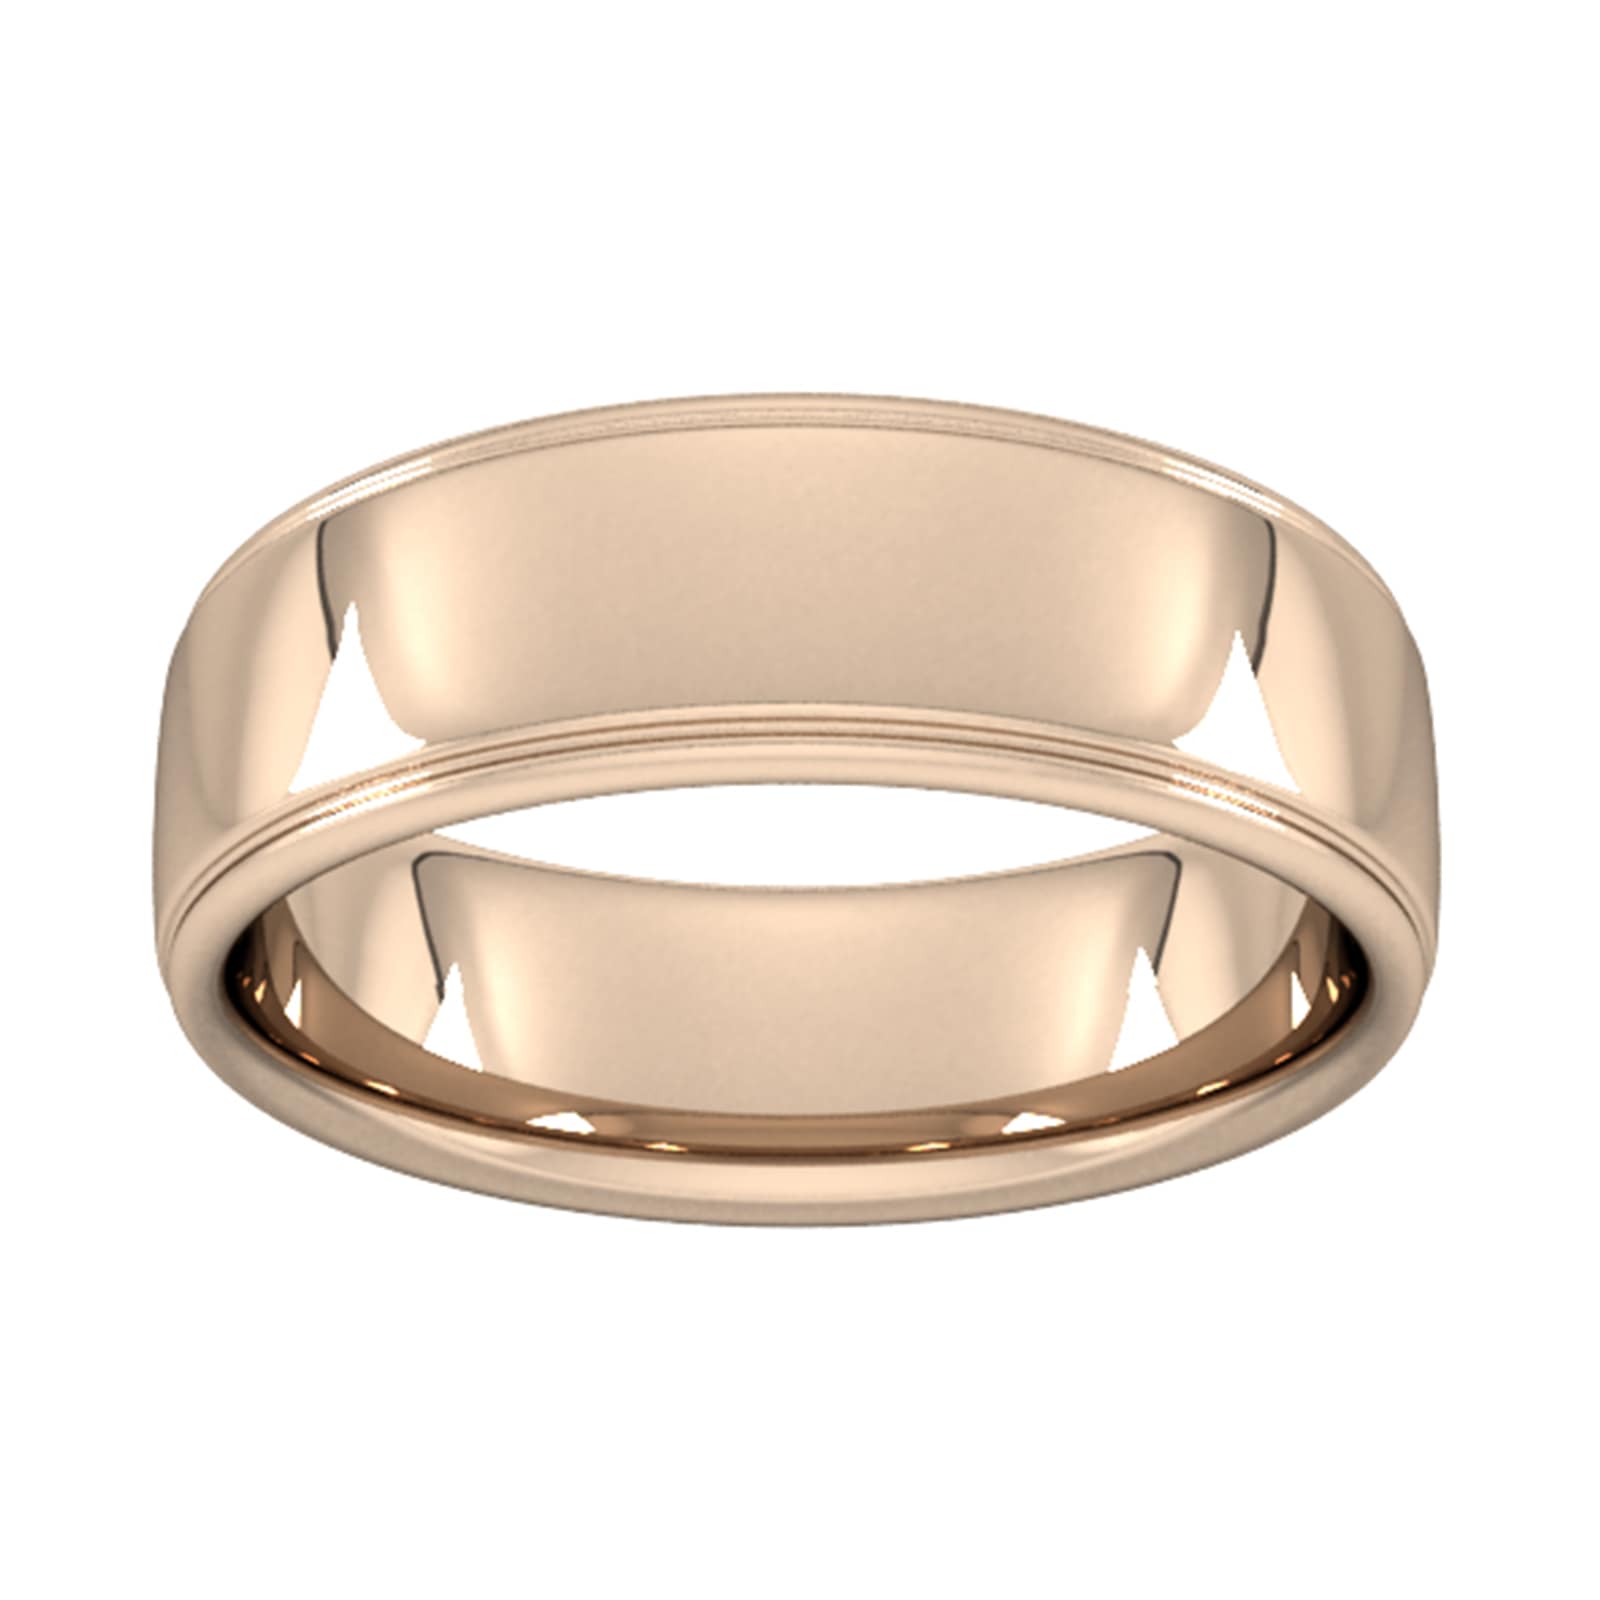 7mm Slight Court Extra Heavy Polished Finish With Grooves Wedding Ring In 18 Carat Rose Gold - Ring Size Y